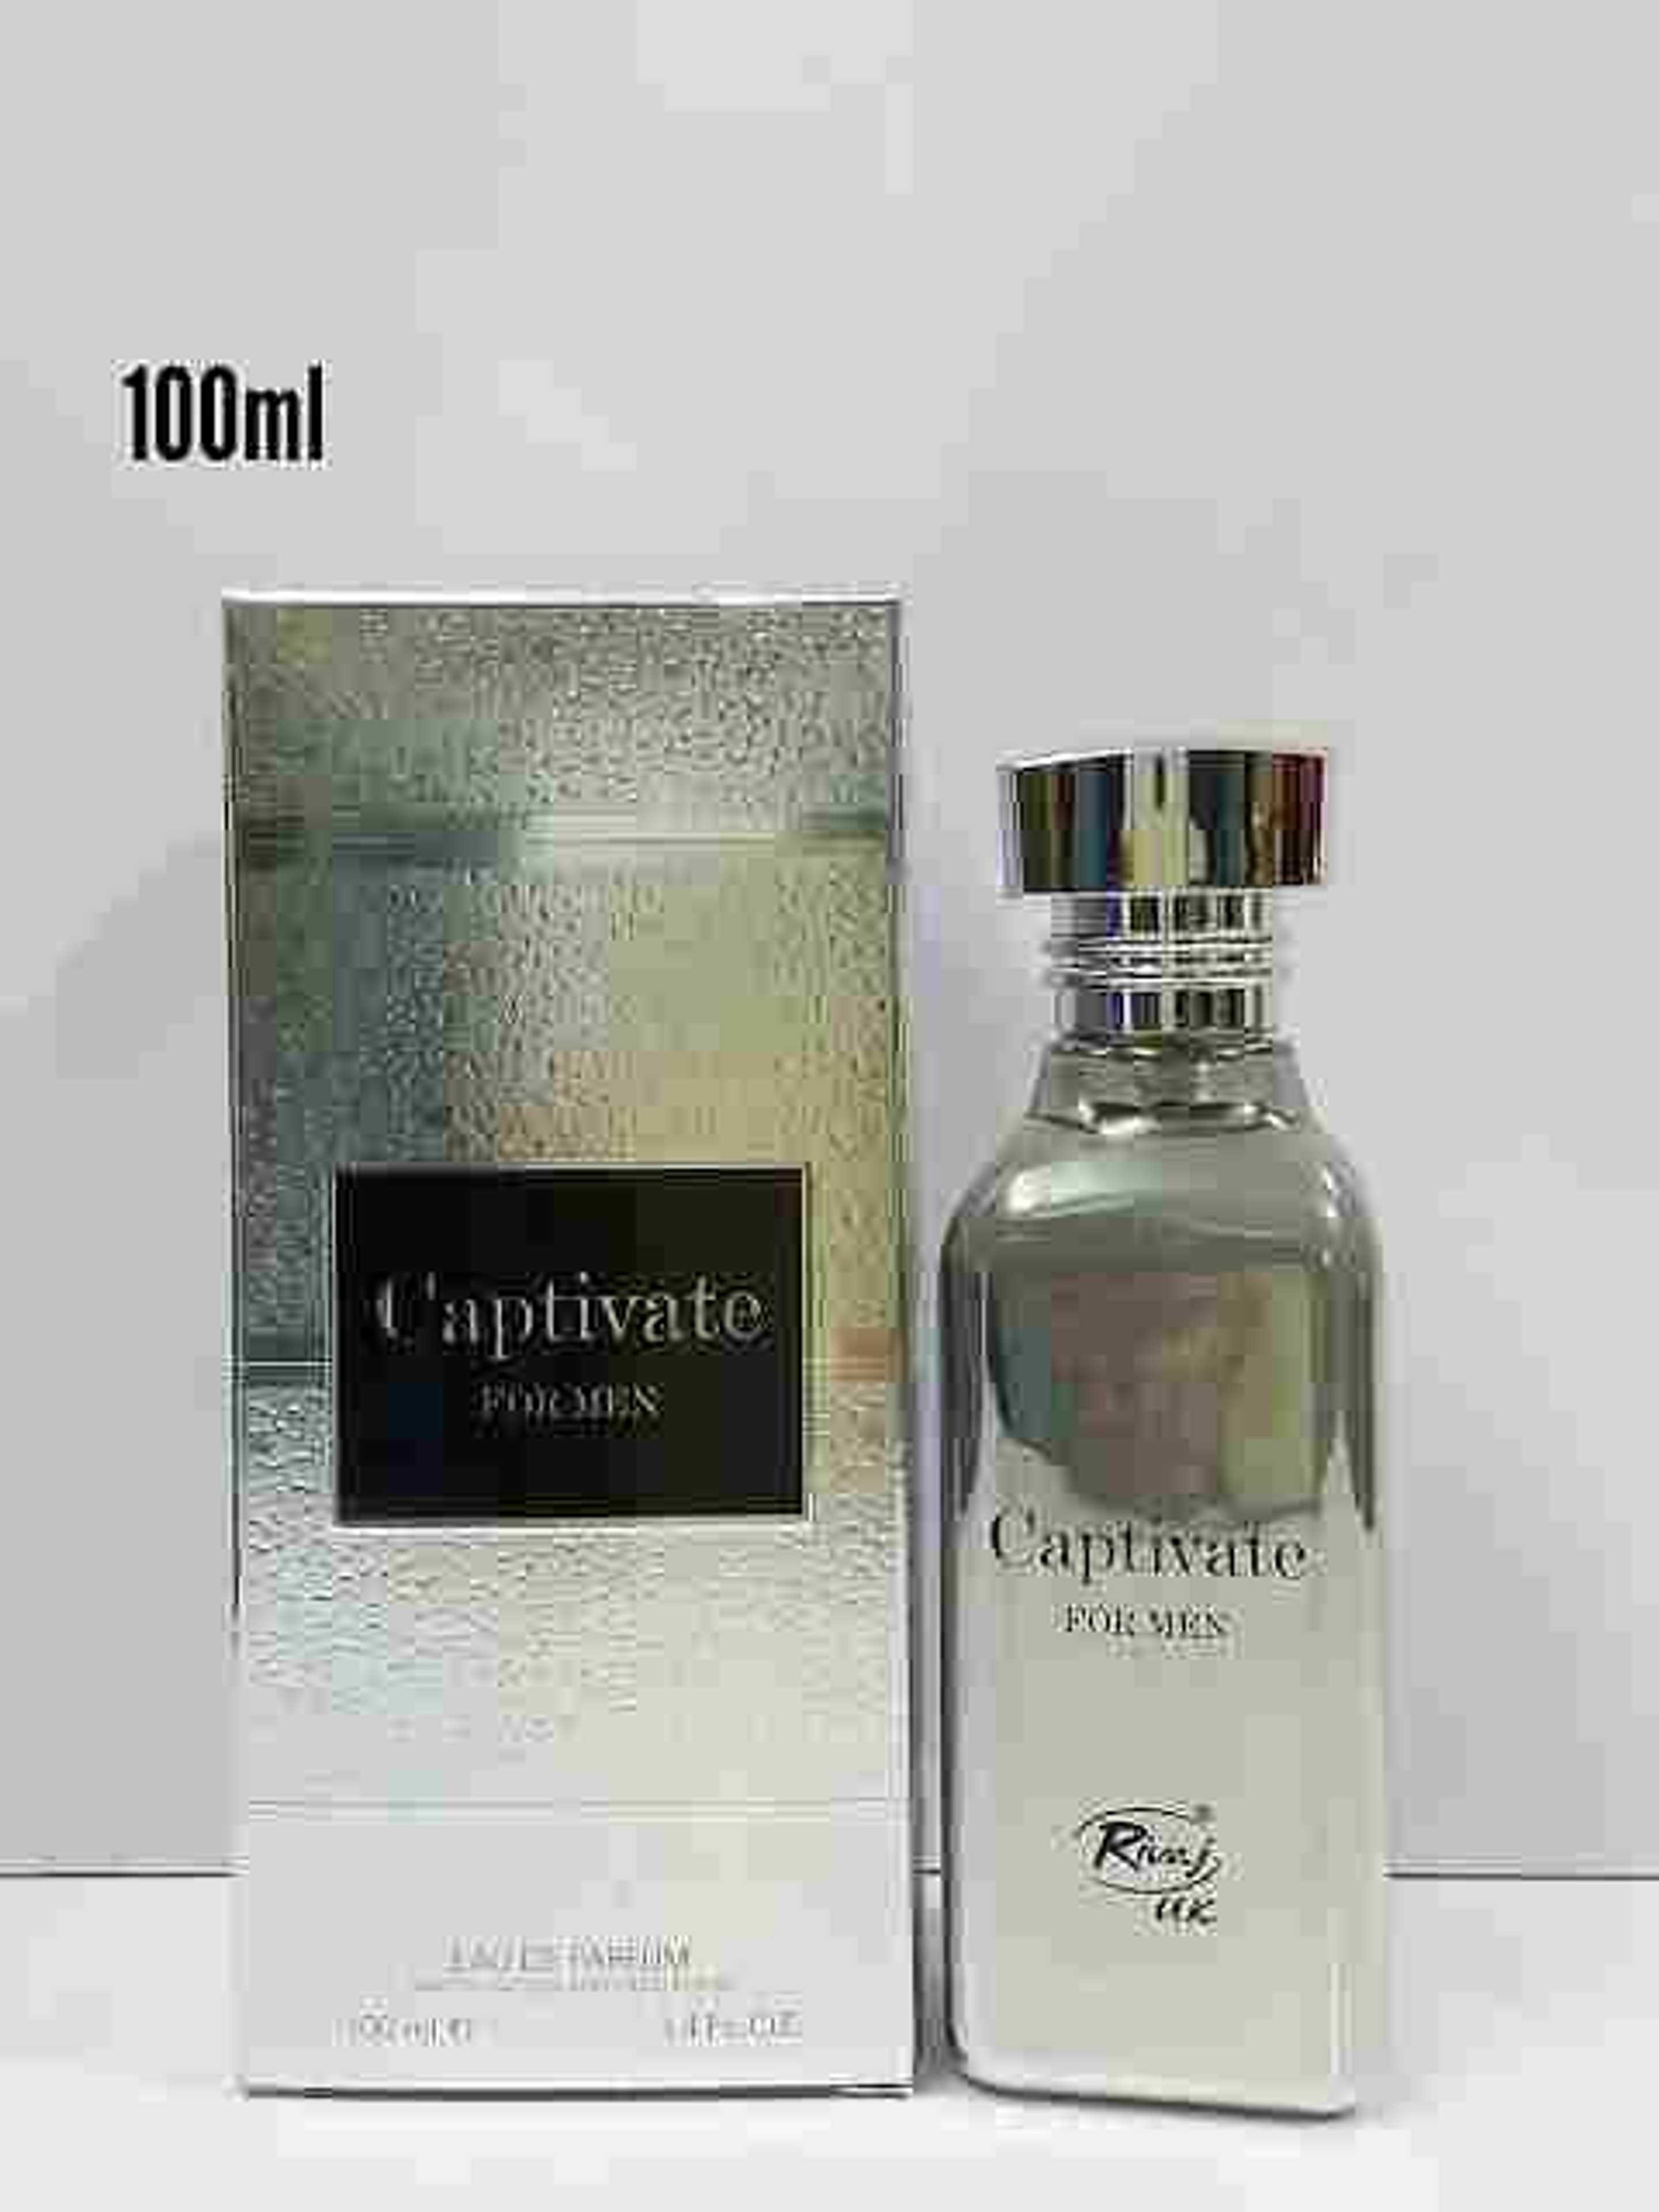 captivate perfume for man by Rivaj uk